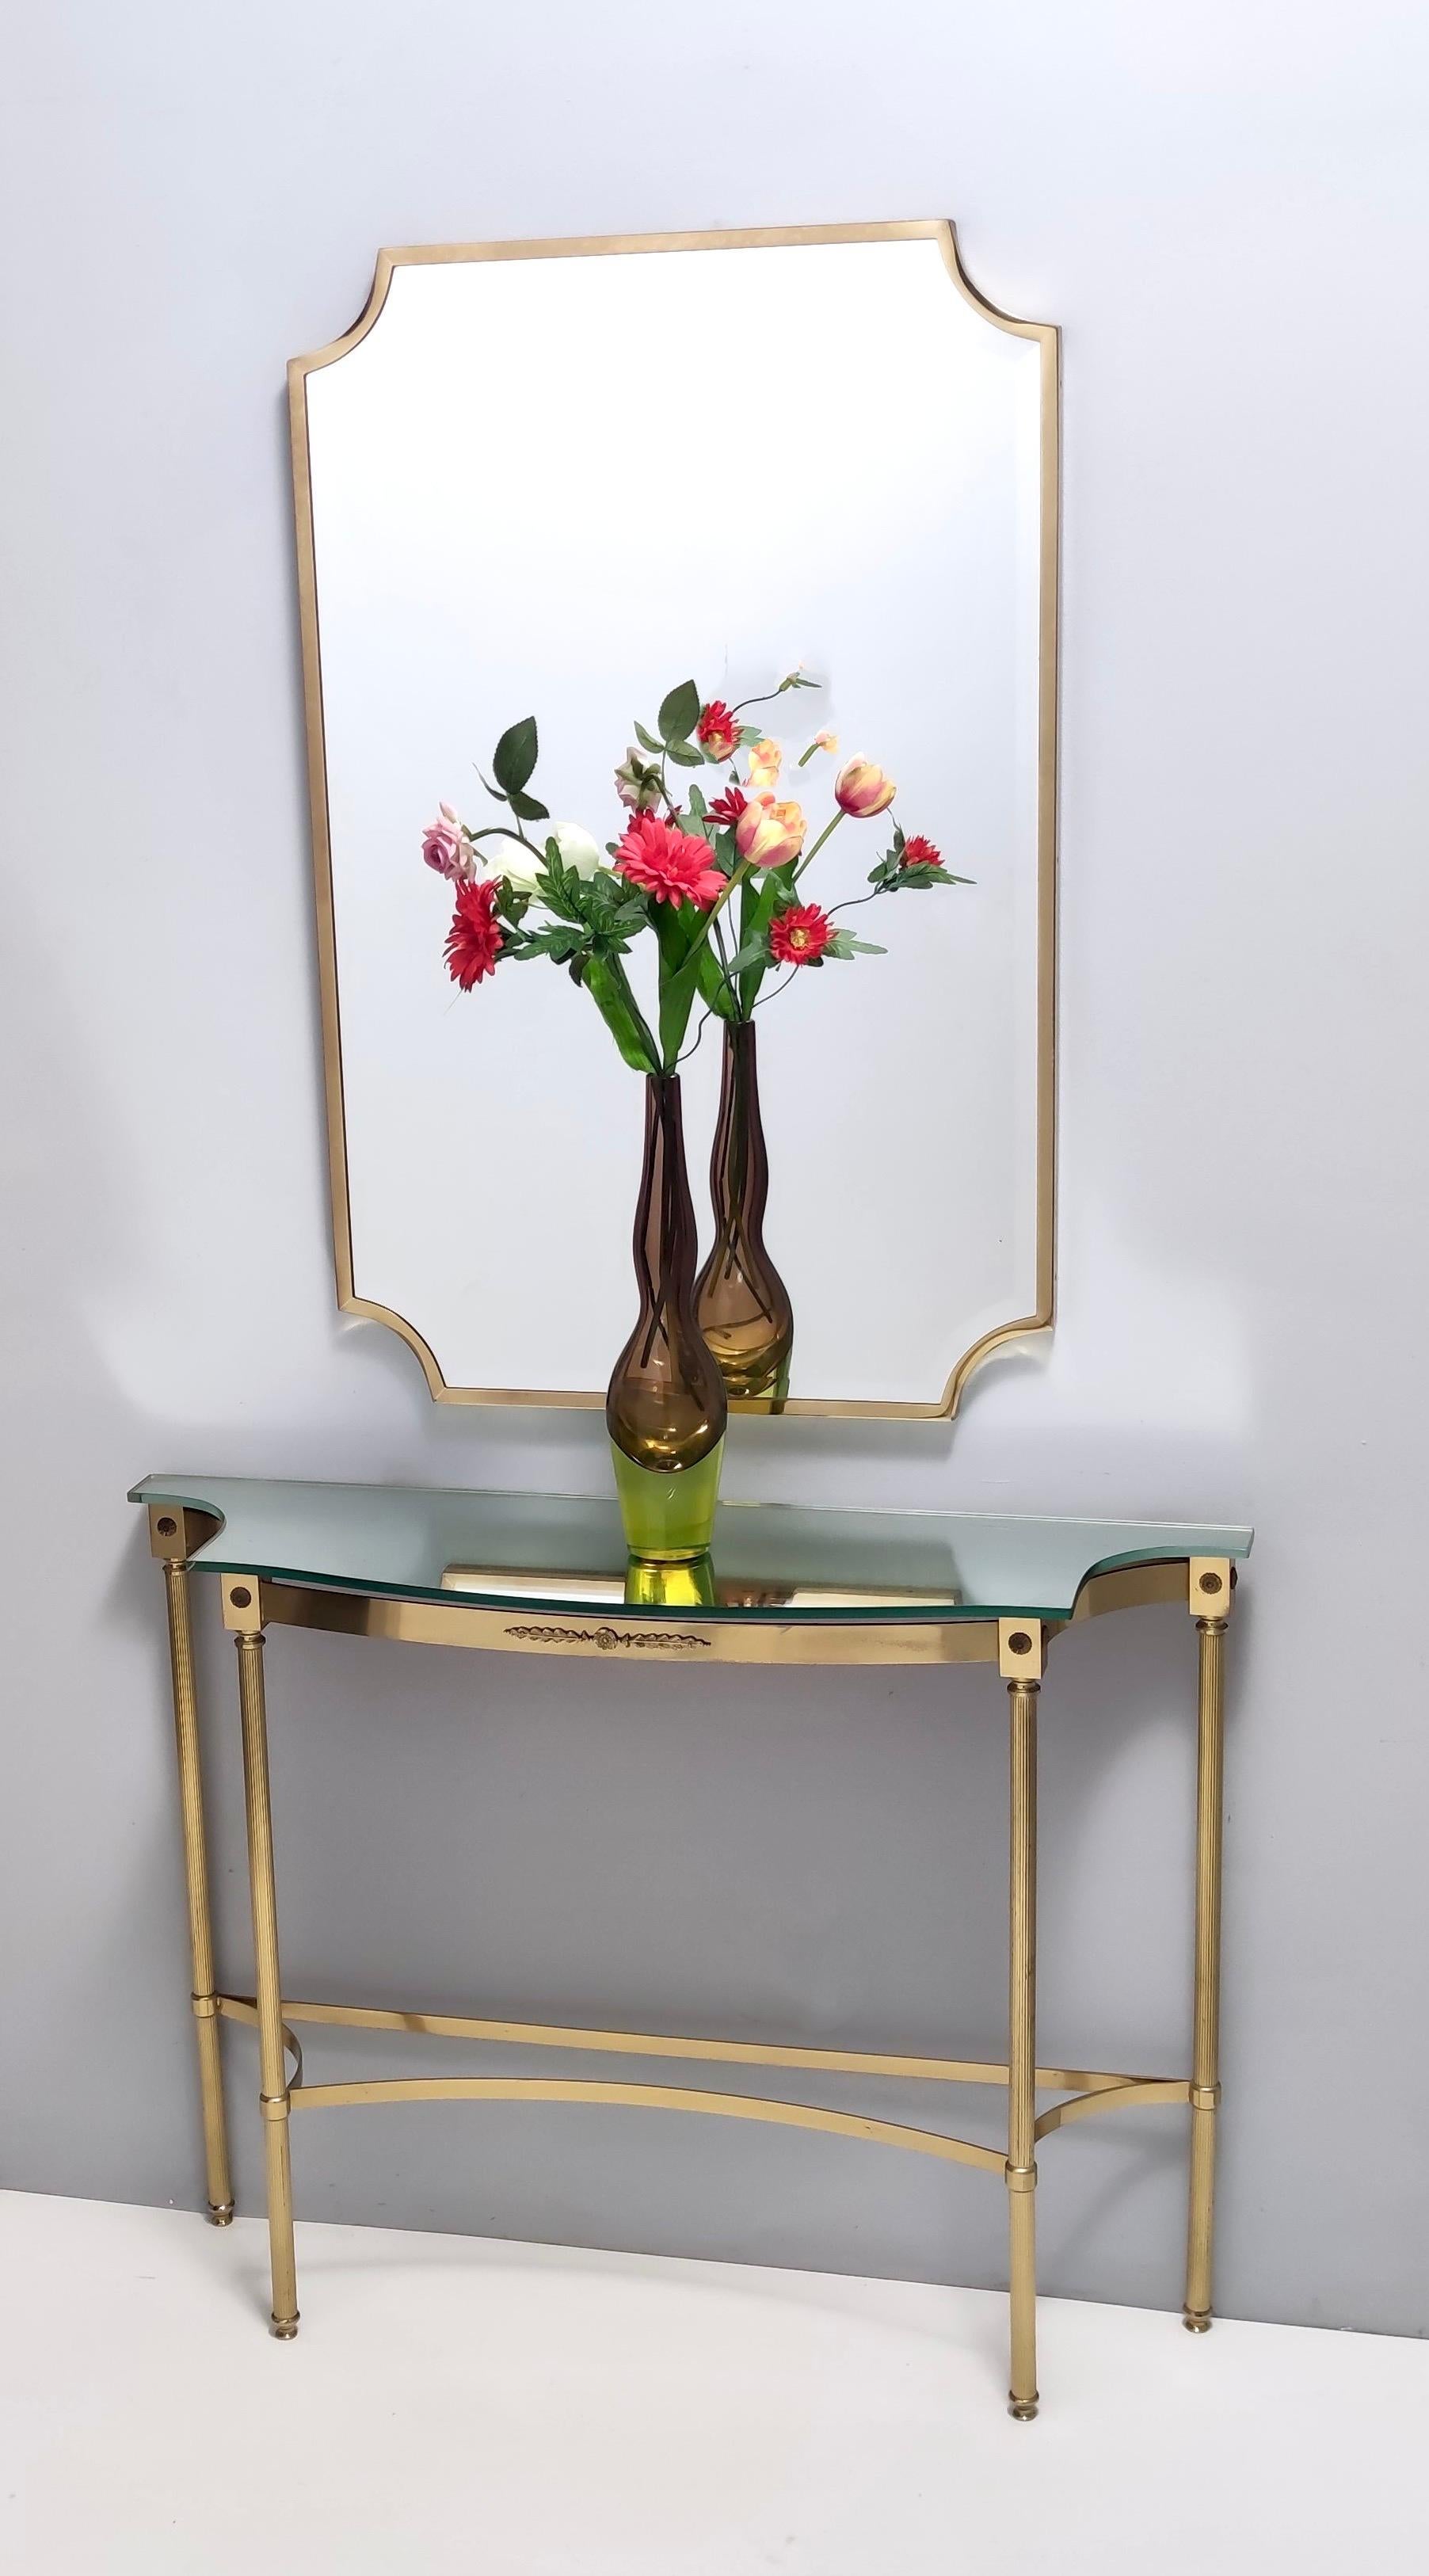 Made in Italy, 1960s.
This console table features a mirrored top and a brass frame.
It is a vintage item, therefore it might show slight traces of use, but it can be considered as in very good original condition and ready to become a piece in a